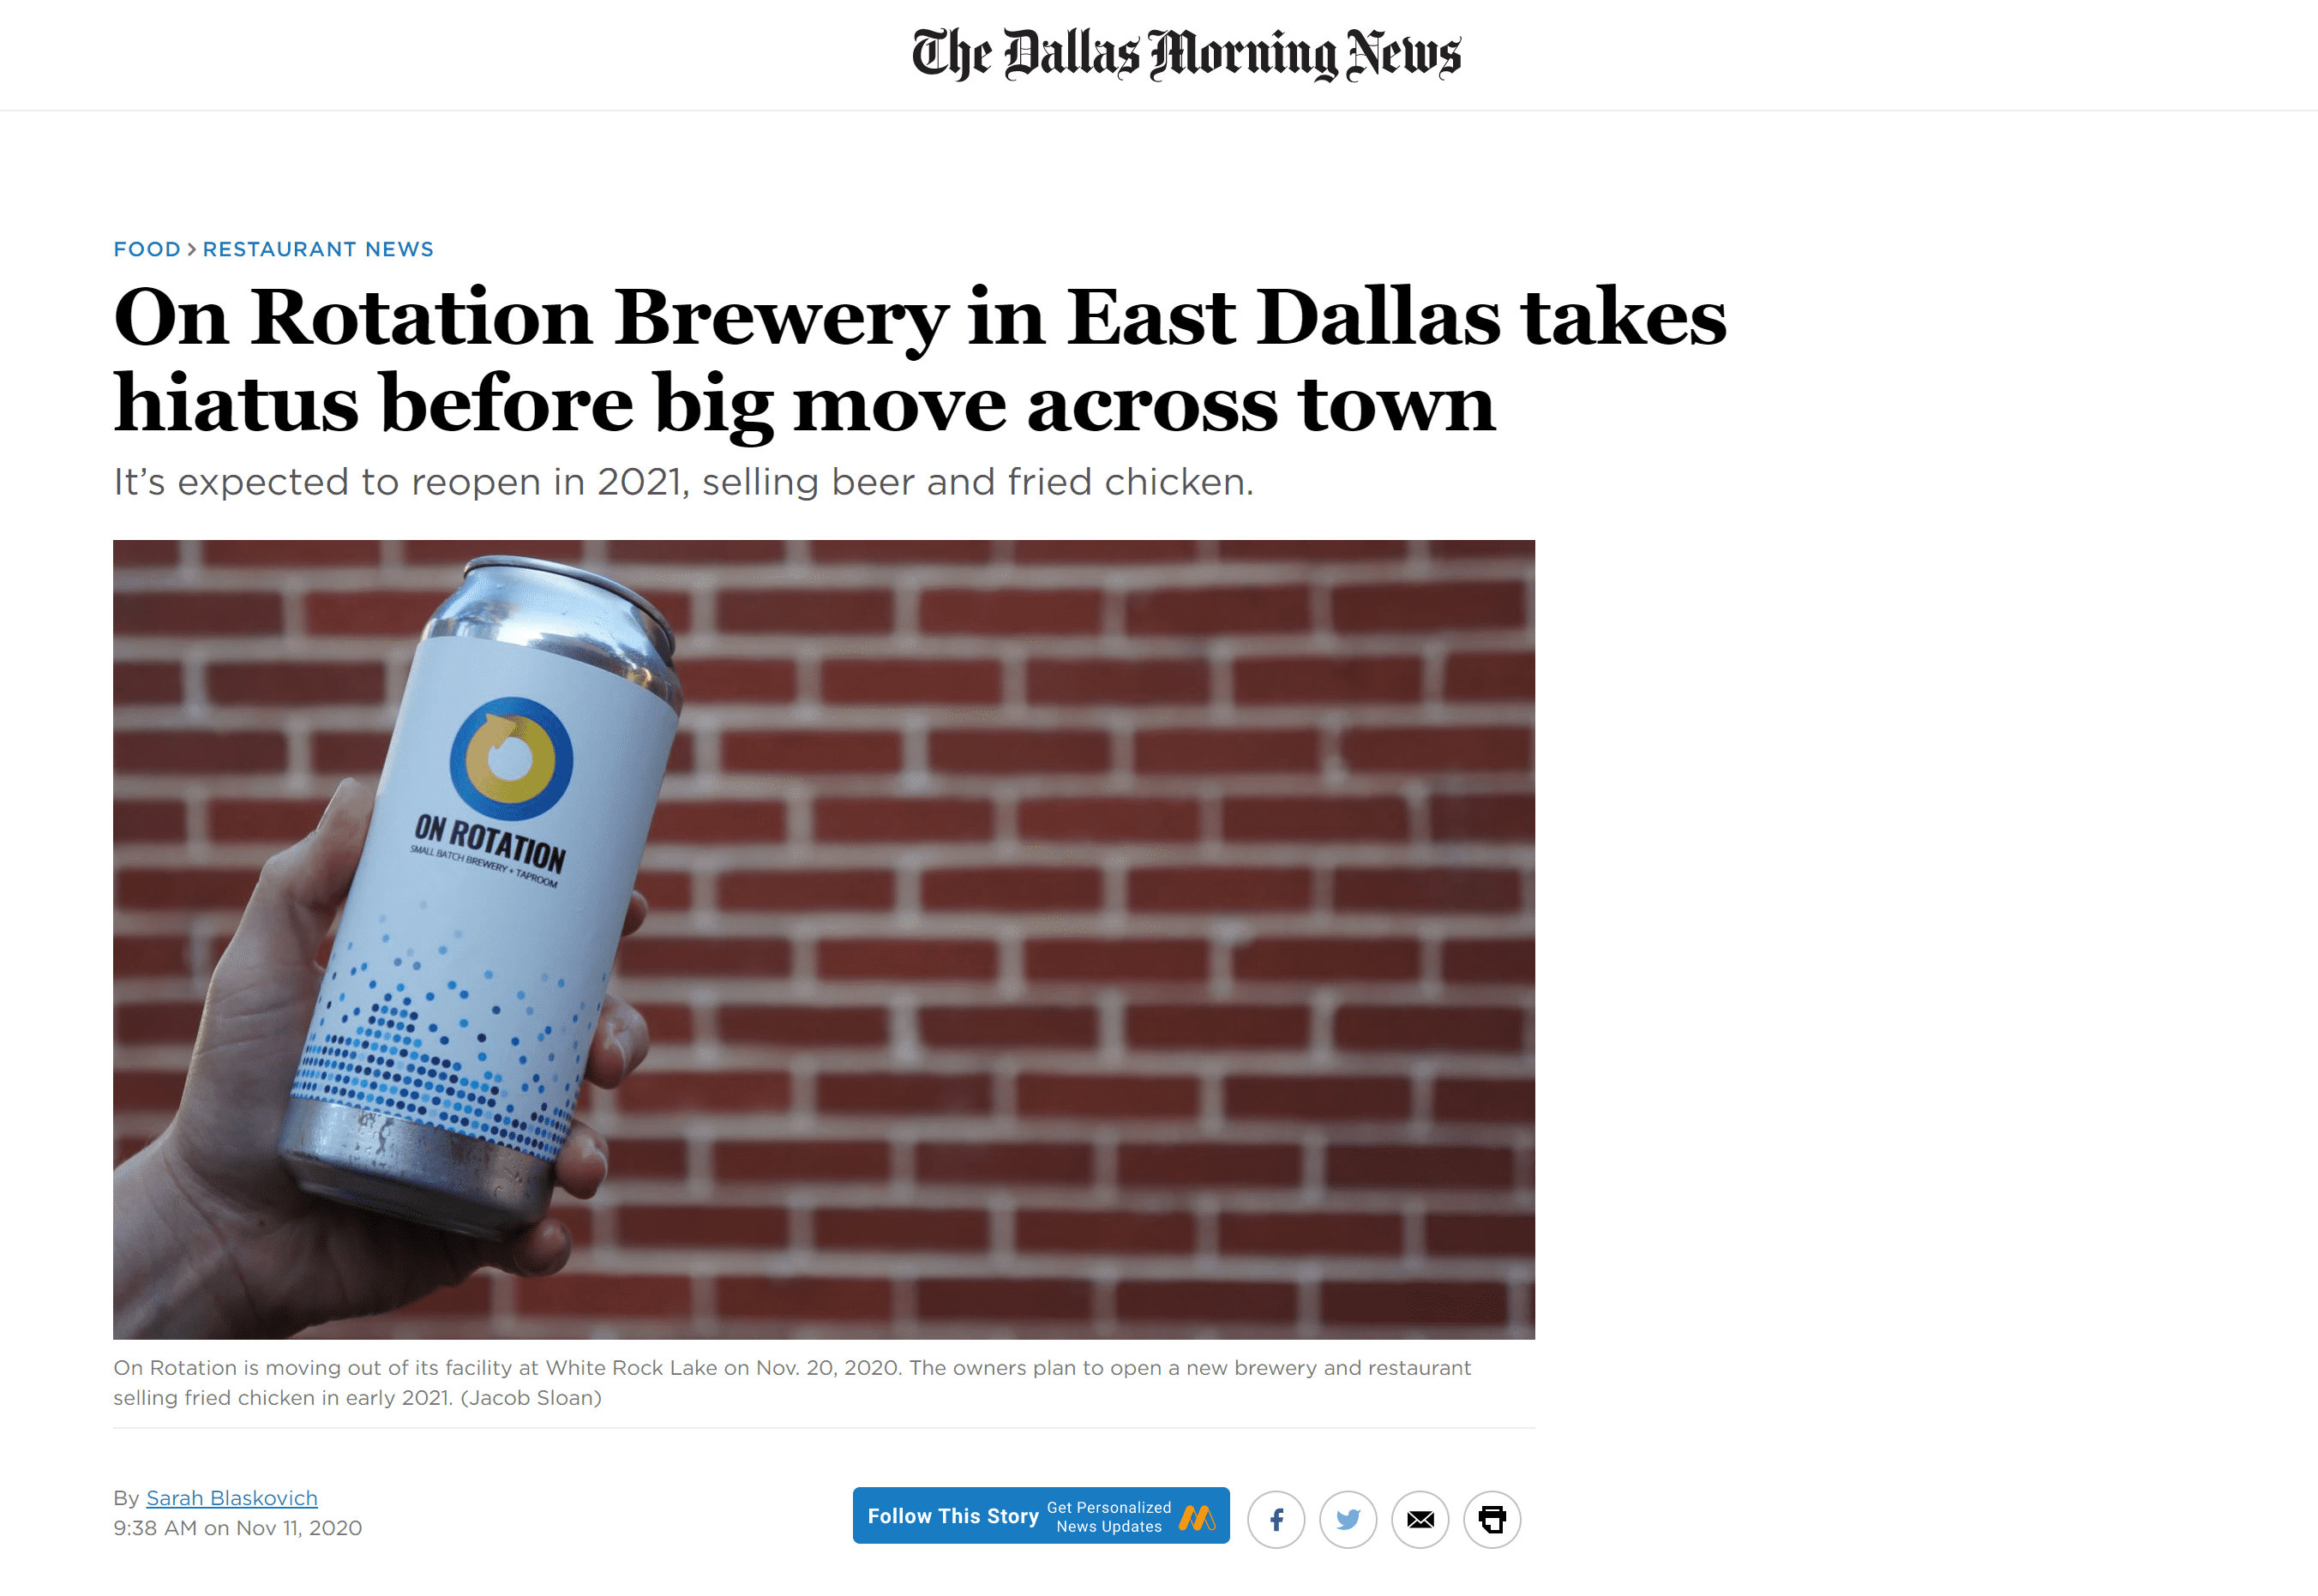 On Rotation Brewery in East Dallas takes hiatus before big move across town [Dallas Morning News]